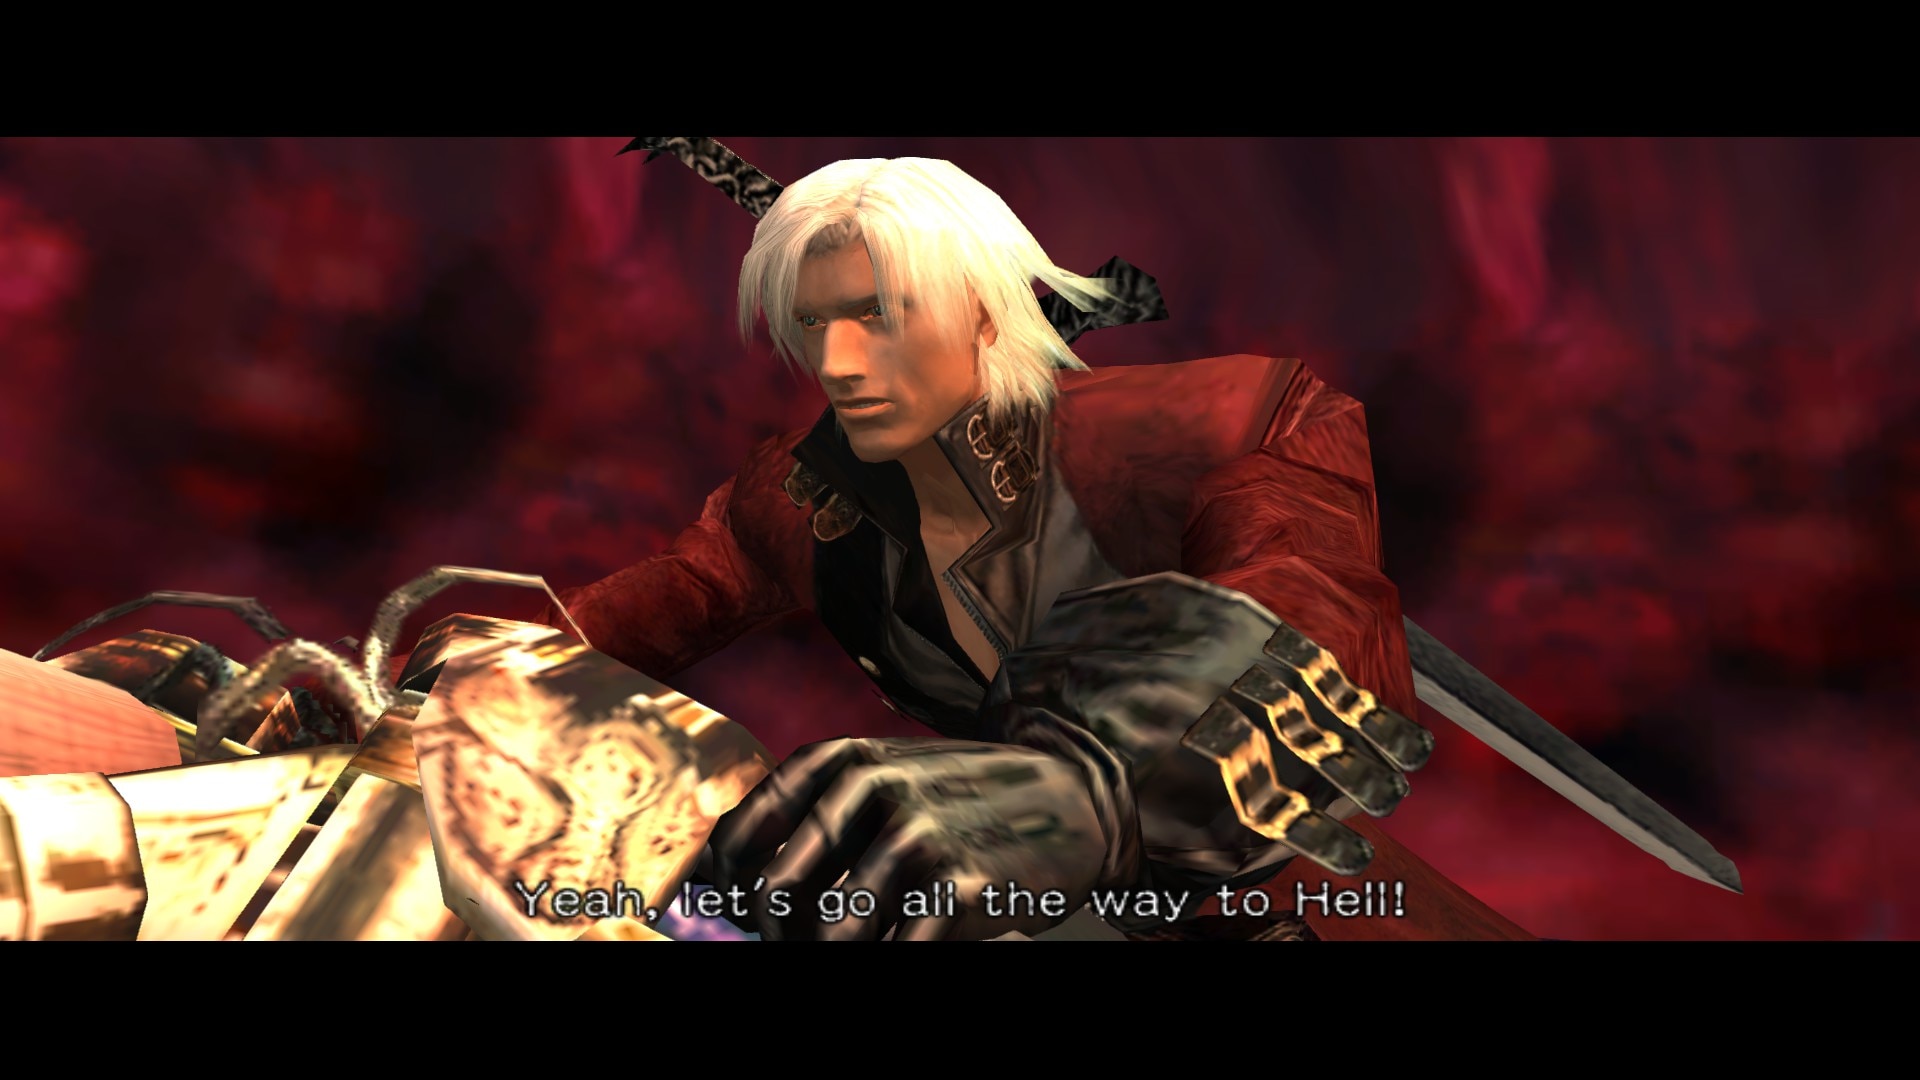 I'm not gay but DMC5 Dante is so hot (especially with the dmc2 mod